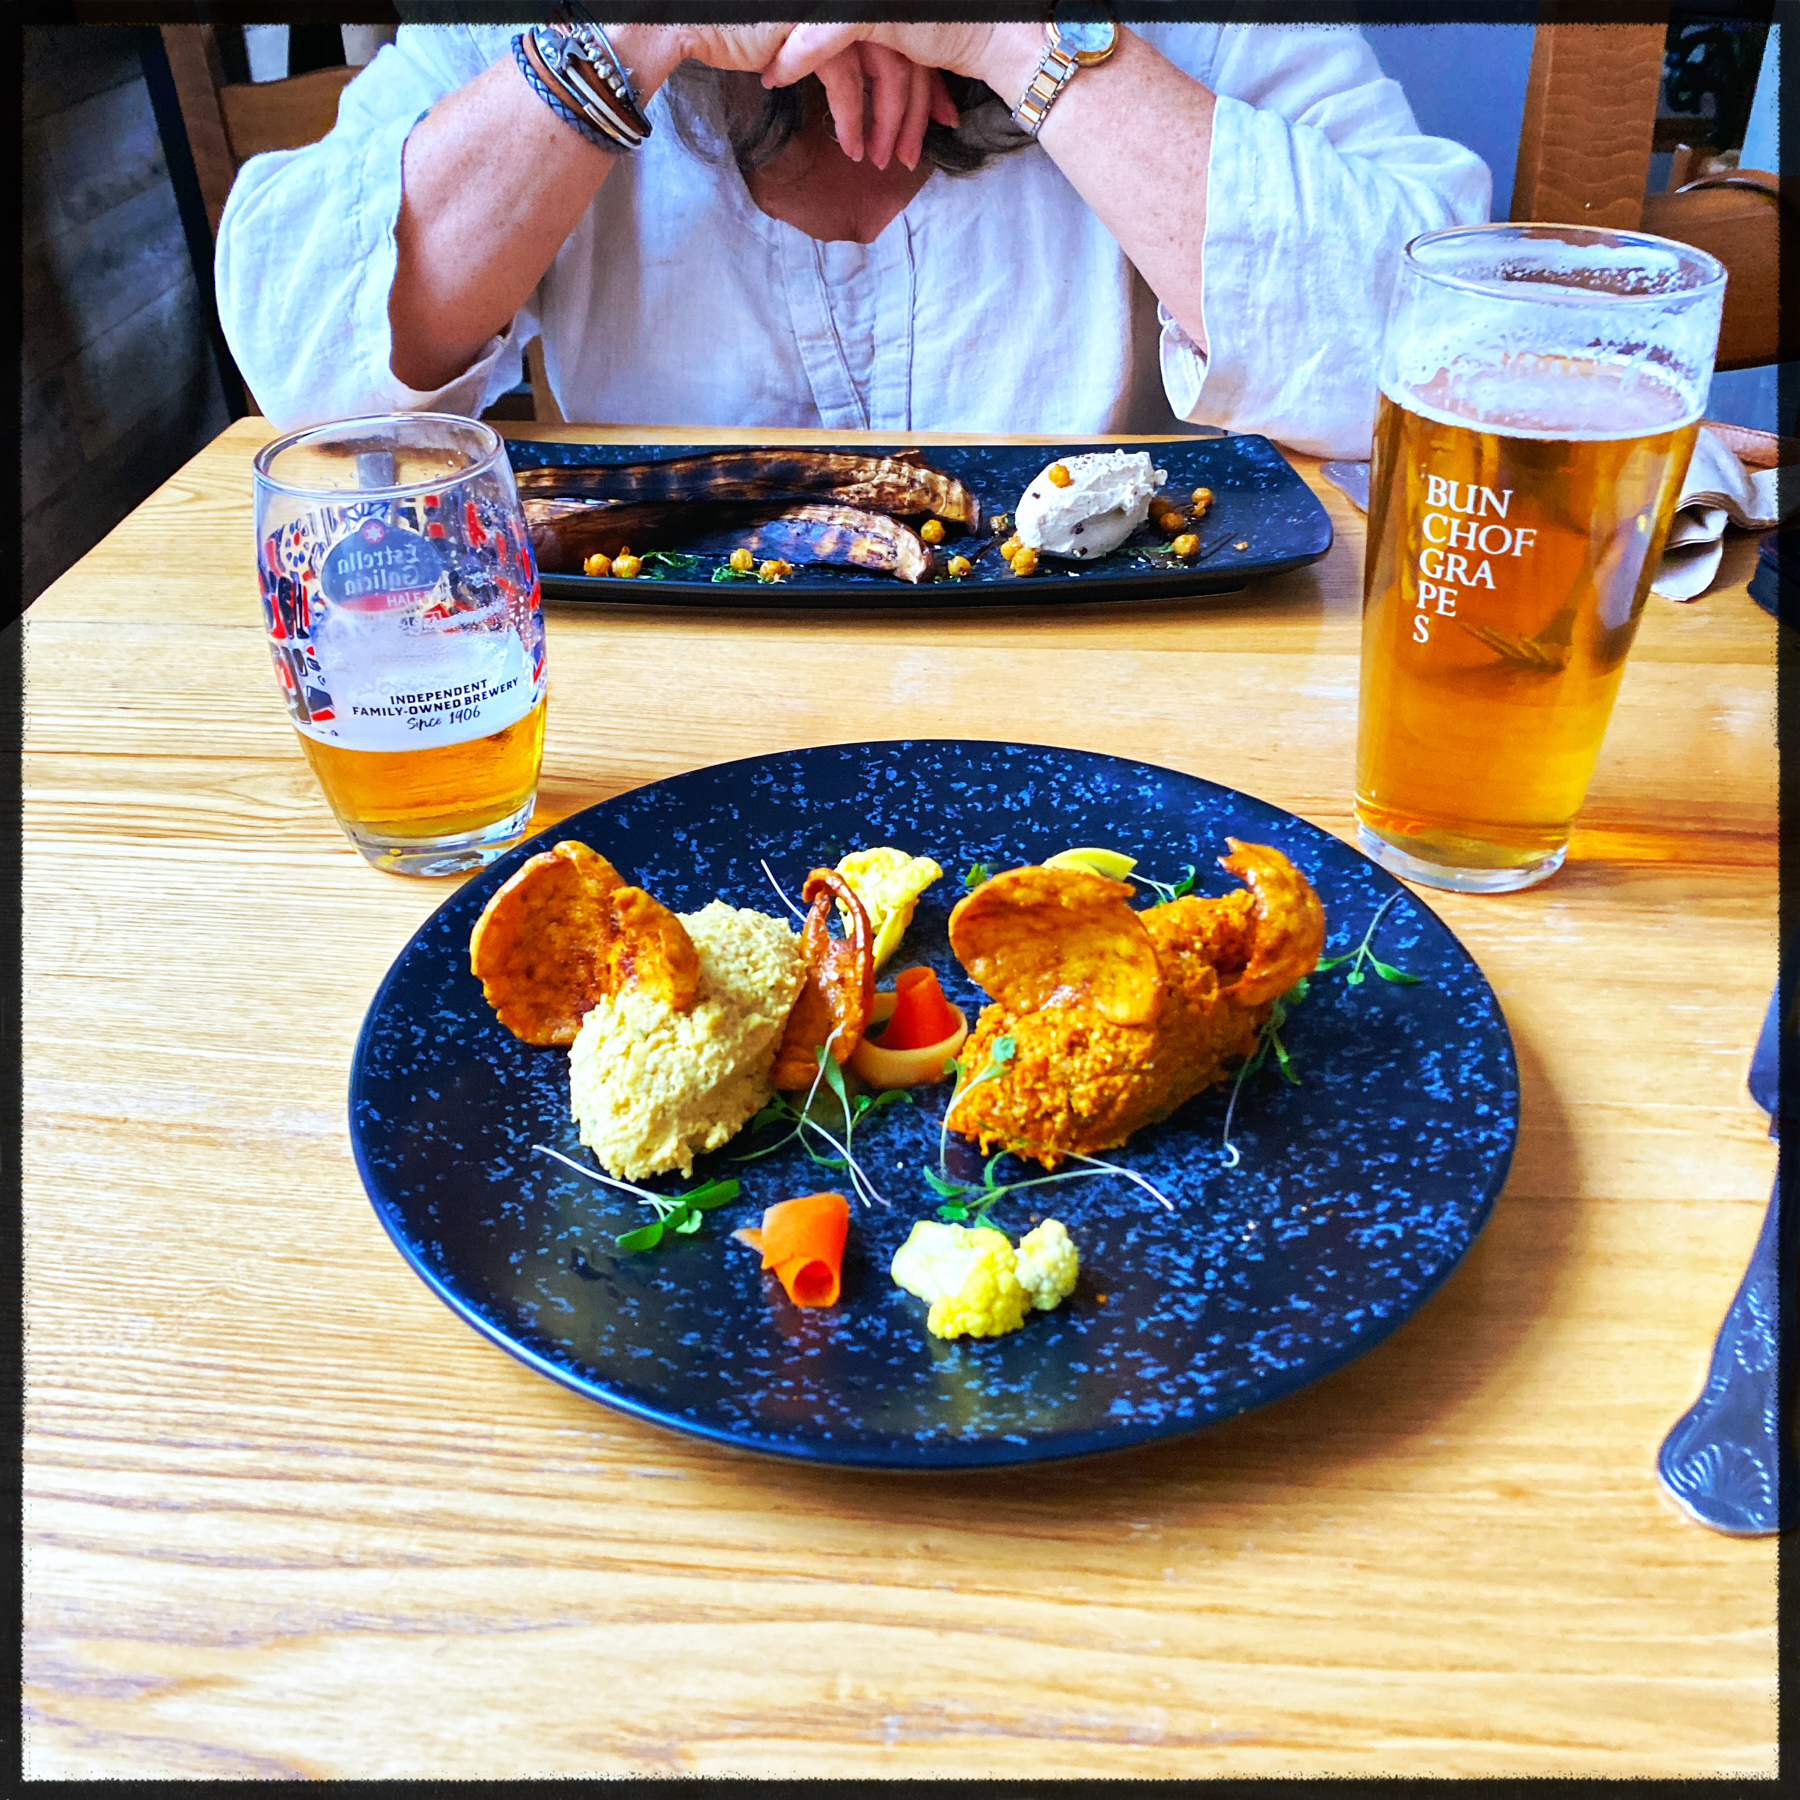 A dining setup featuring two plates of food on a wooden table with two glasses of beer. The plate in the foreground has a sophisticated presentation of what appears to be a dish with patés and garnished vegetables.